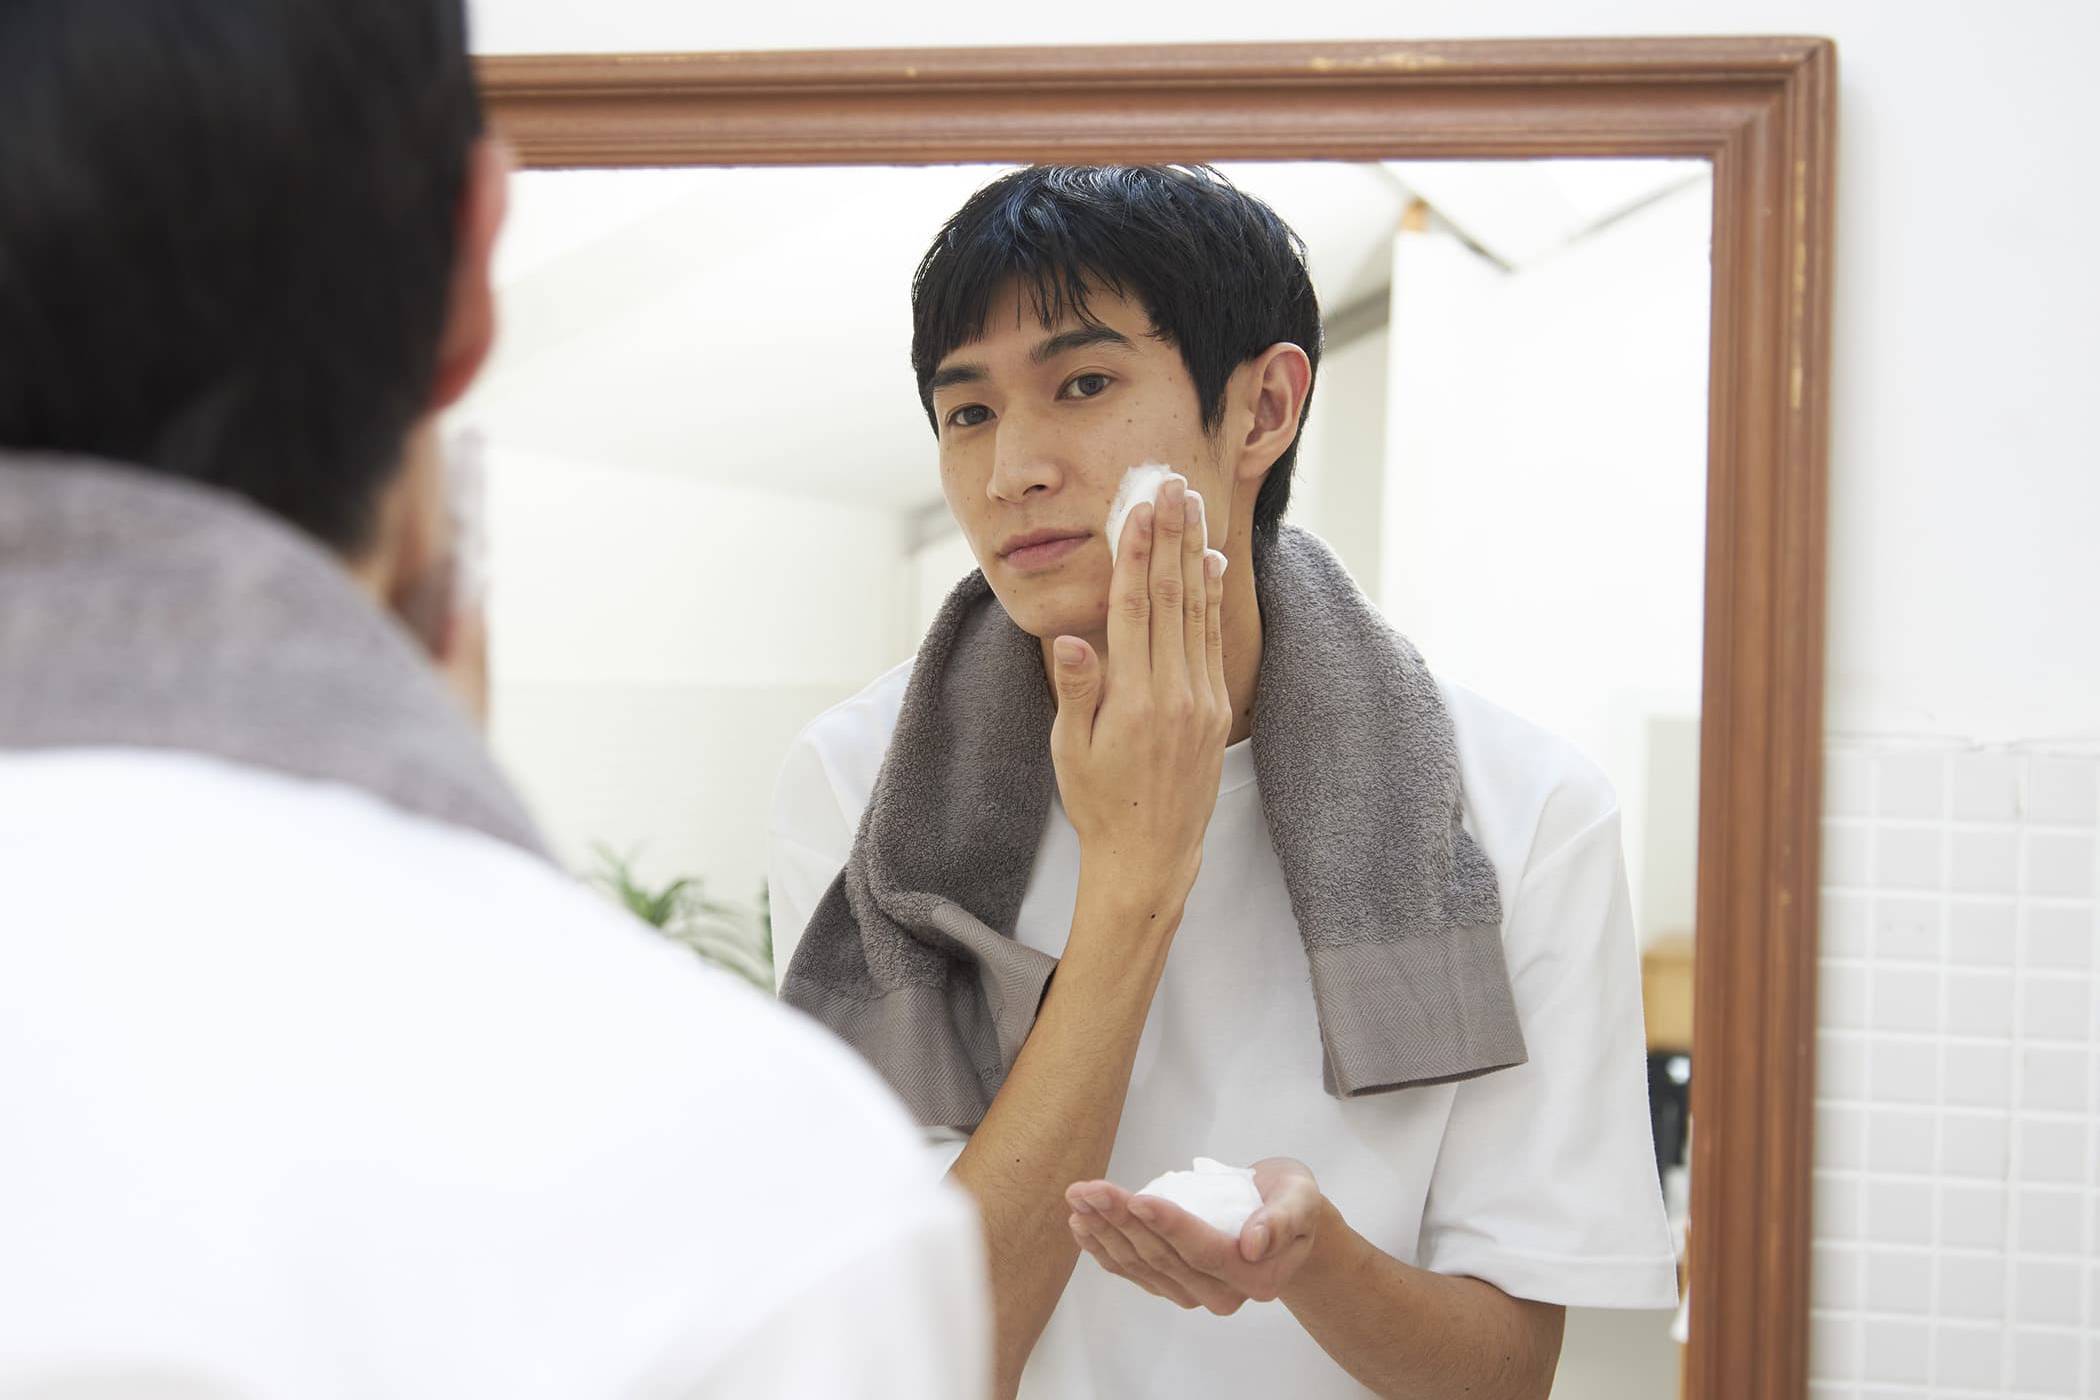 Cleanliness comes from smooth skin and hair. Controlling sebum is the key to a man's summer success.